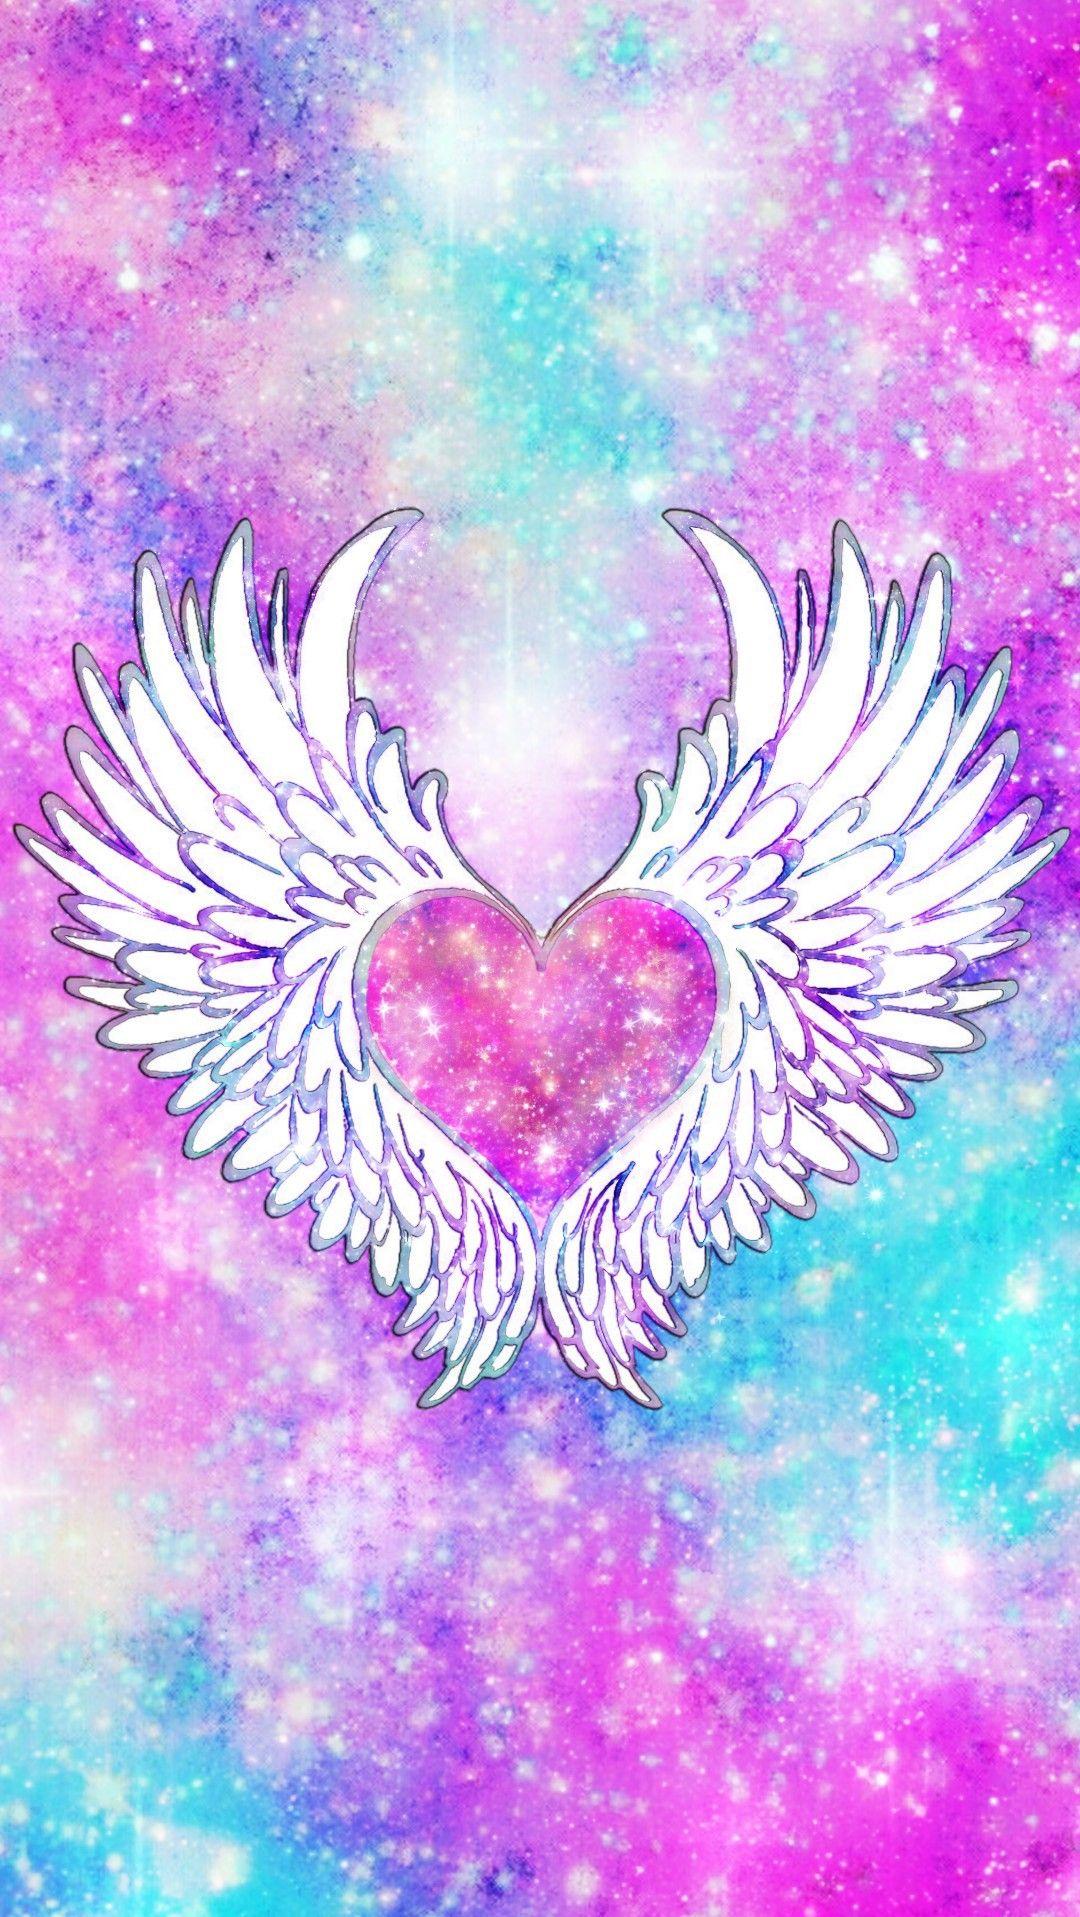 Wings Of Love Galaxy, made by me #pink #galaxy #wallpaper #background #sparkles #glittery #art #c. Wings wallpaper, Unicorn wallpaper, Beautiful nature wallpaper